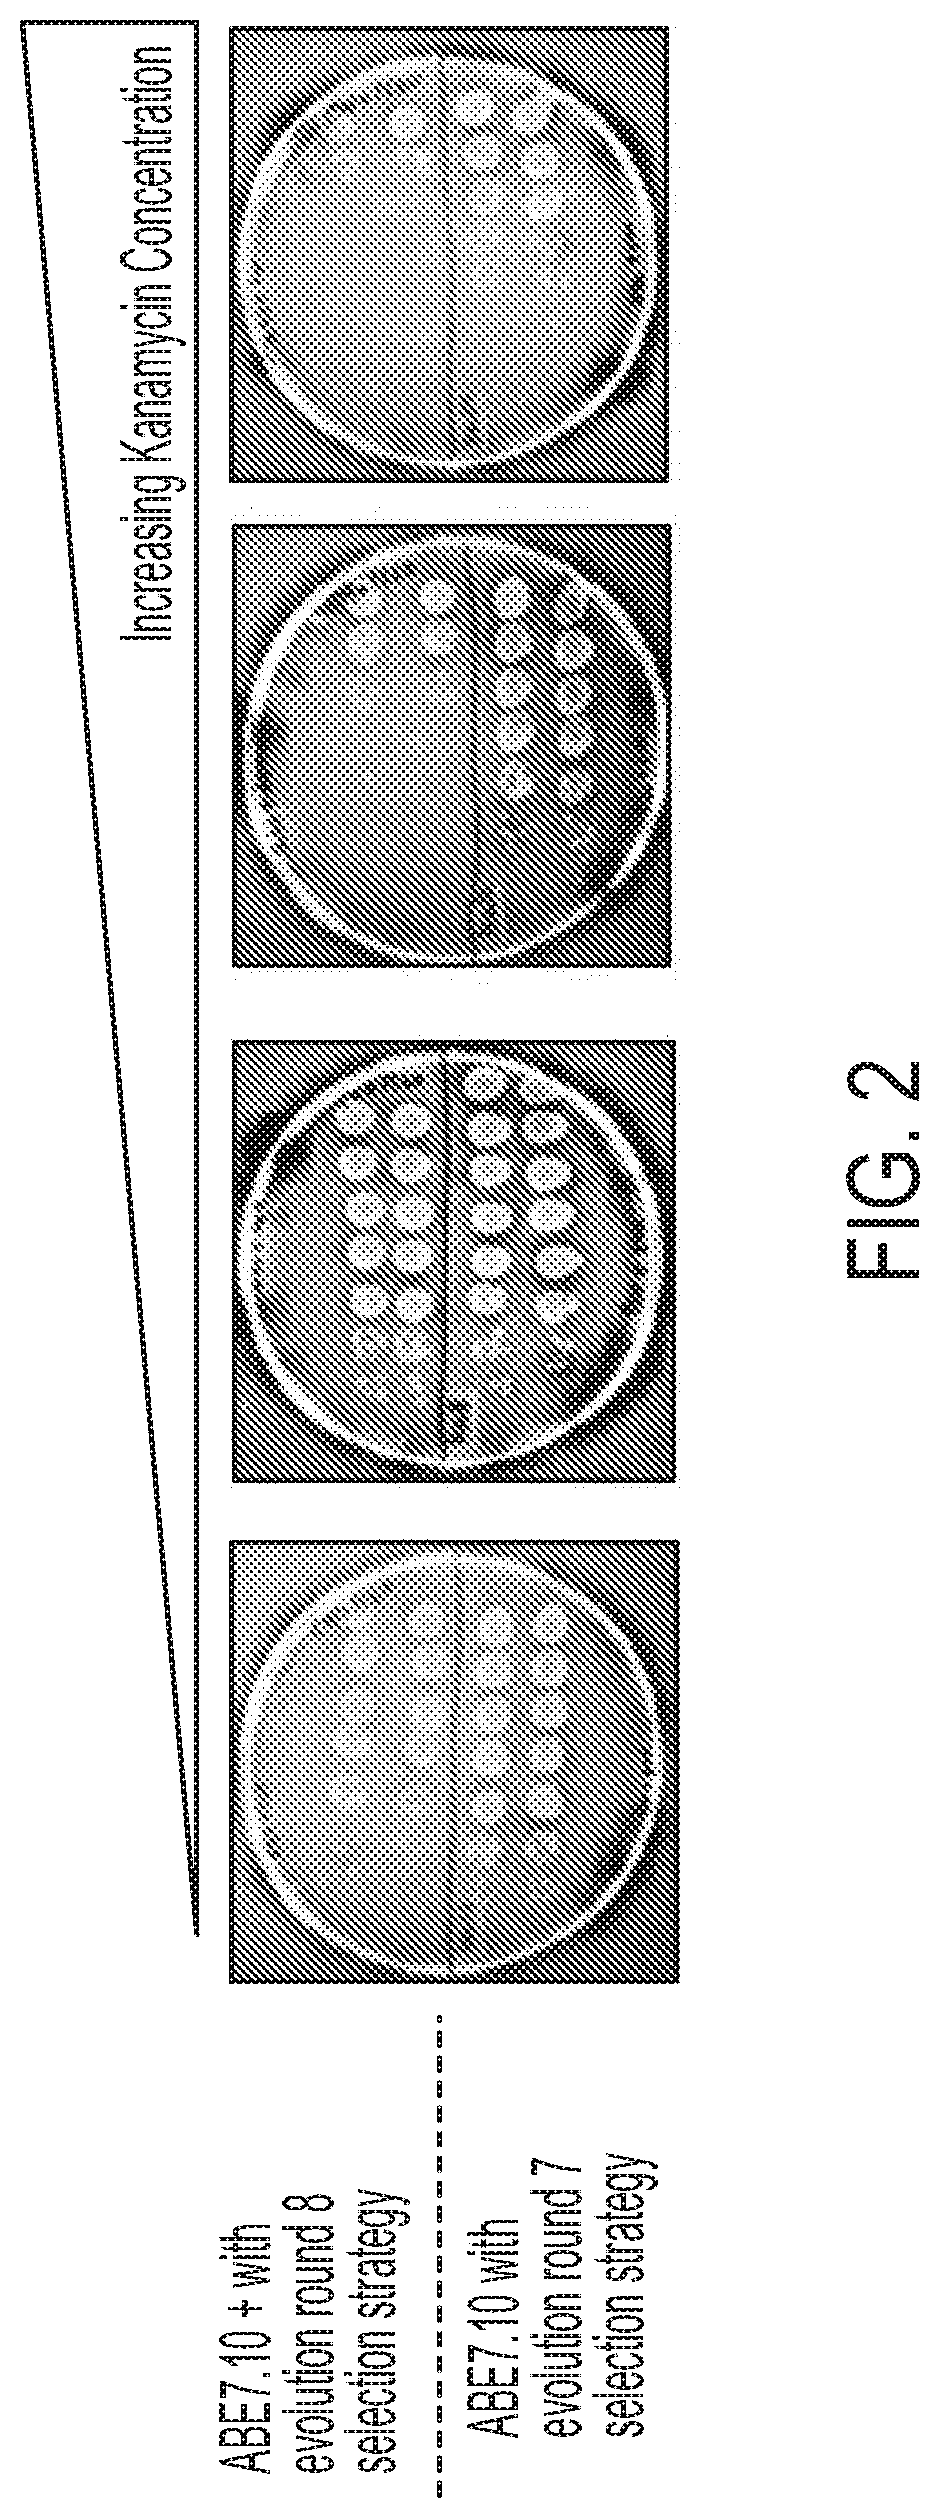 Compositions and methods for treating hemoglobinopathies